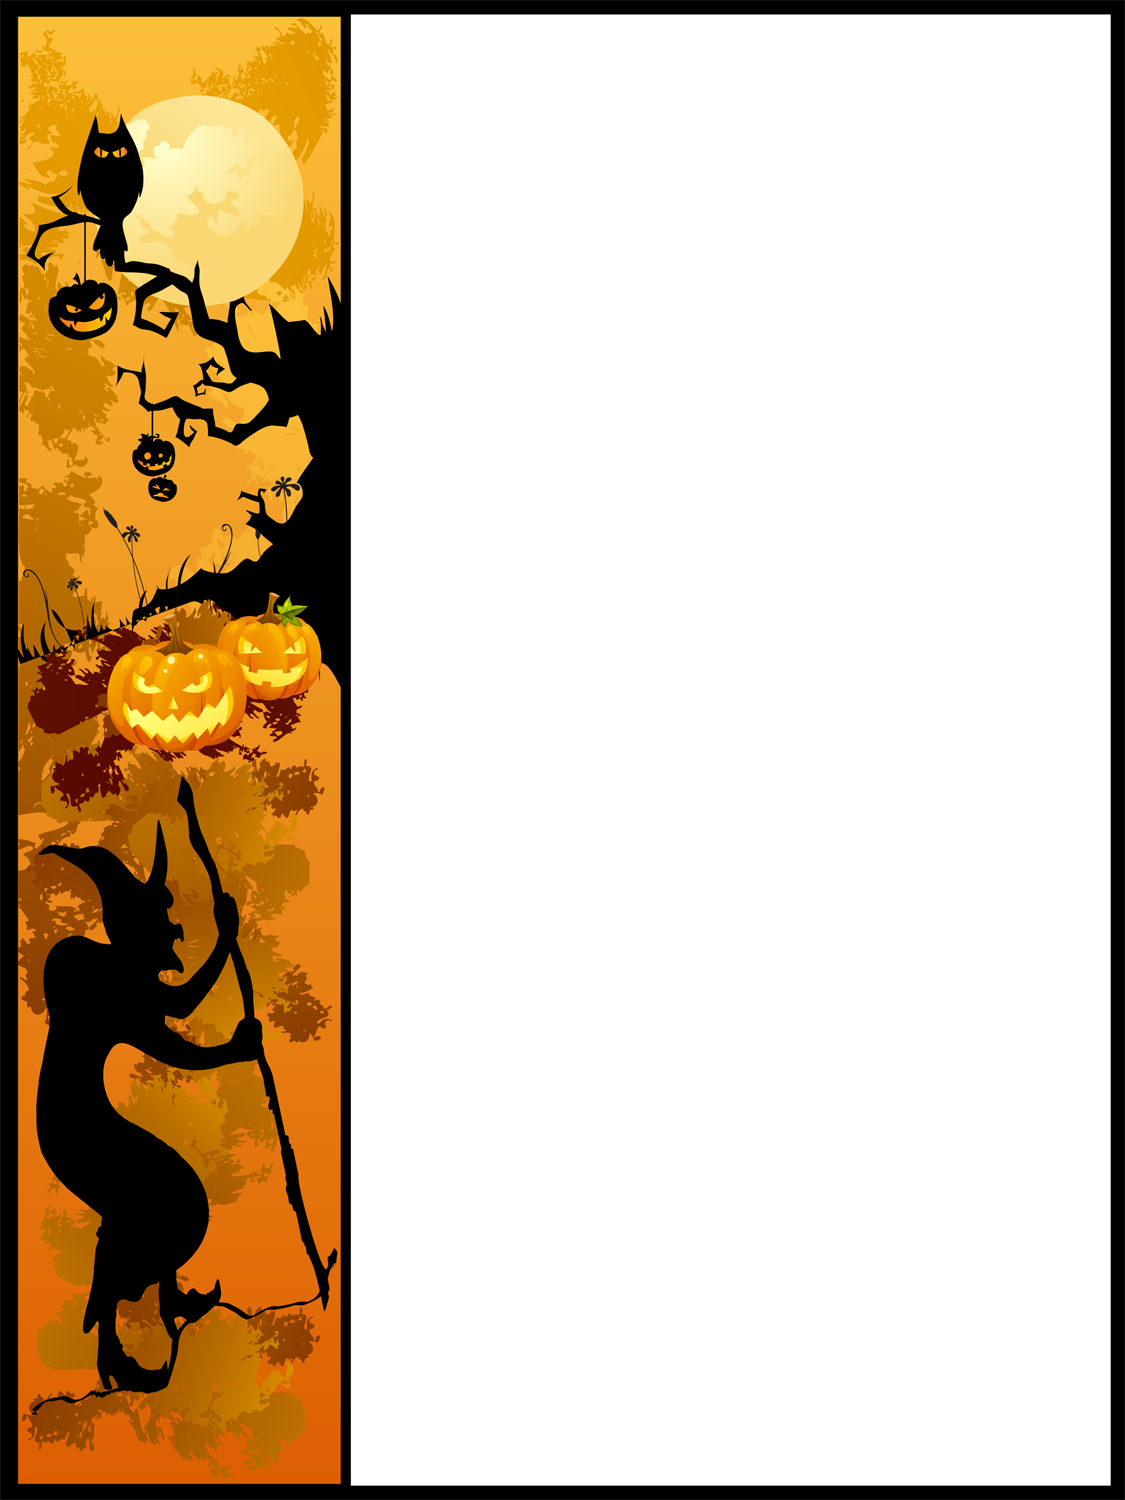 Halloween Border Clipart | Clipart Panda - Free Clipart Images